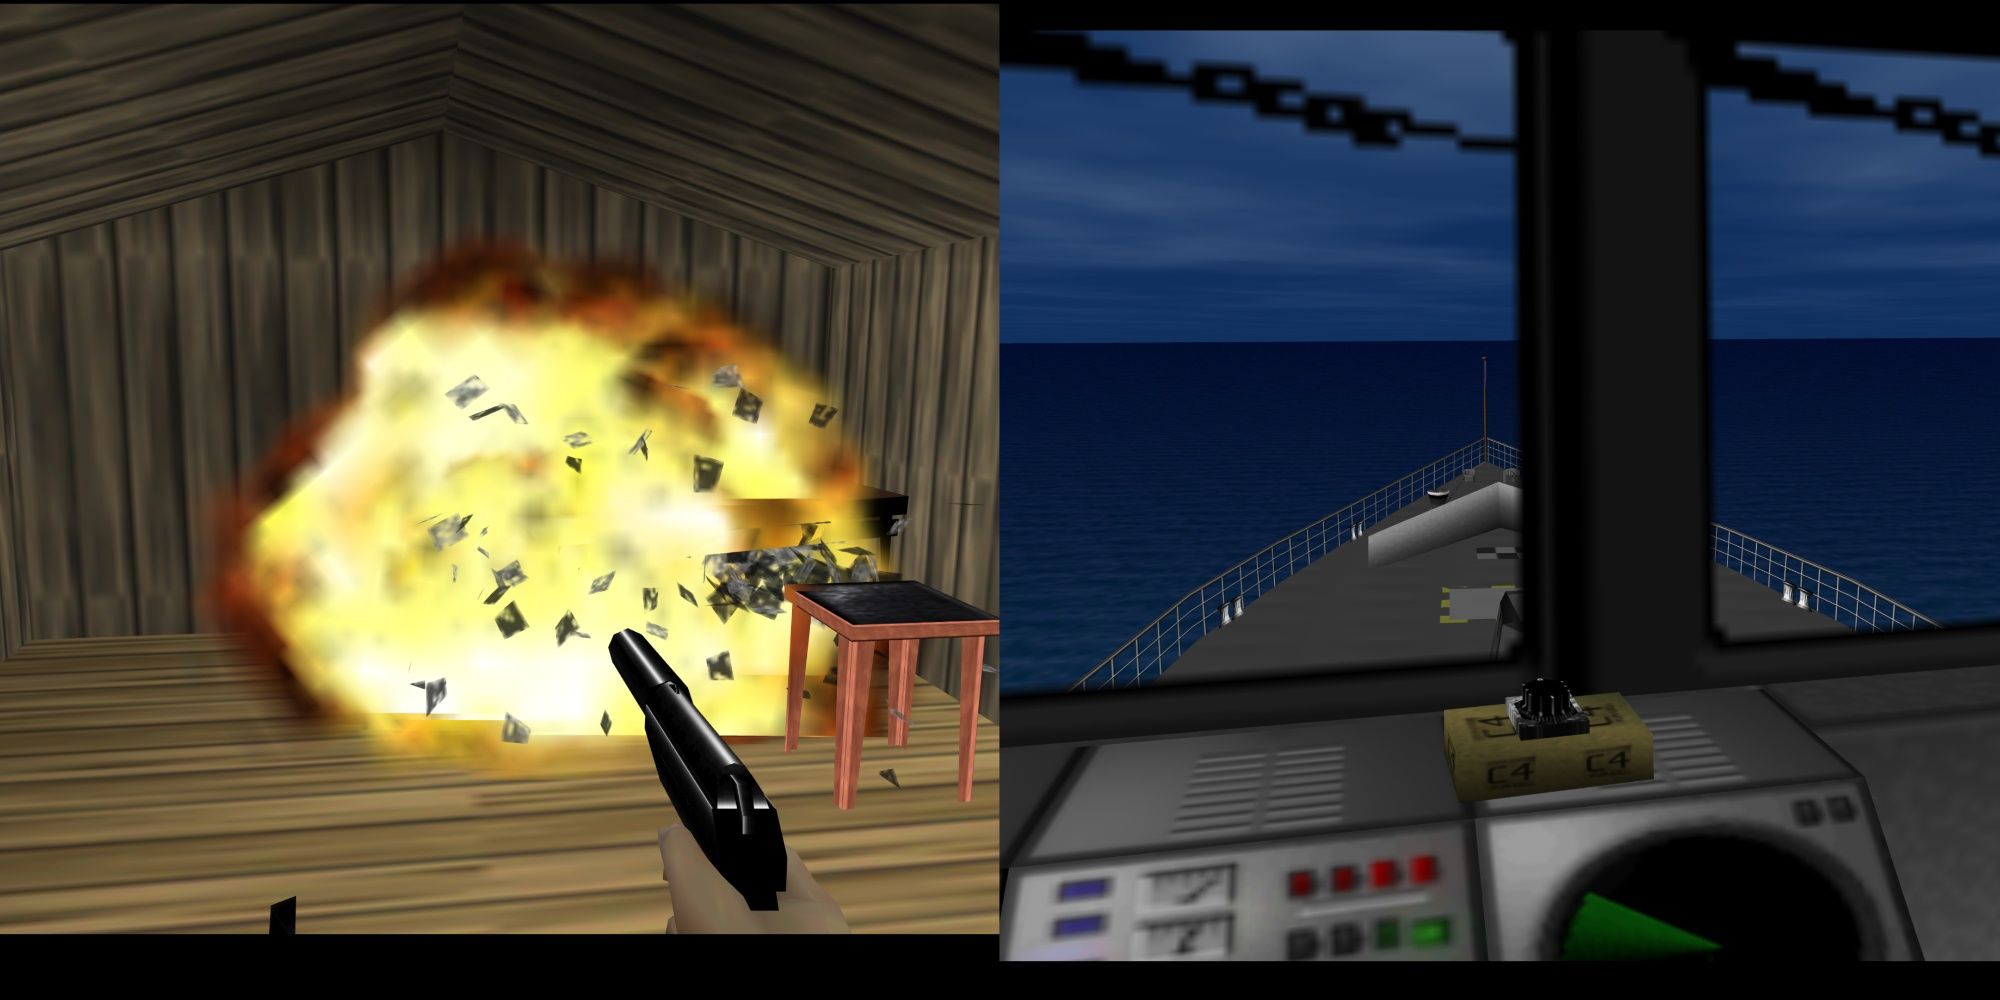 A whole table exploding and a bomb in the Frigate level from GoldenEye 007.